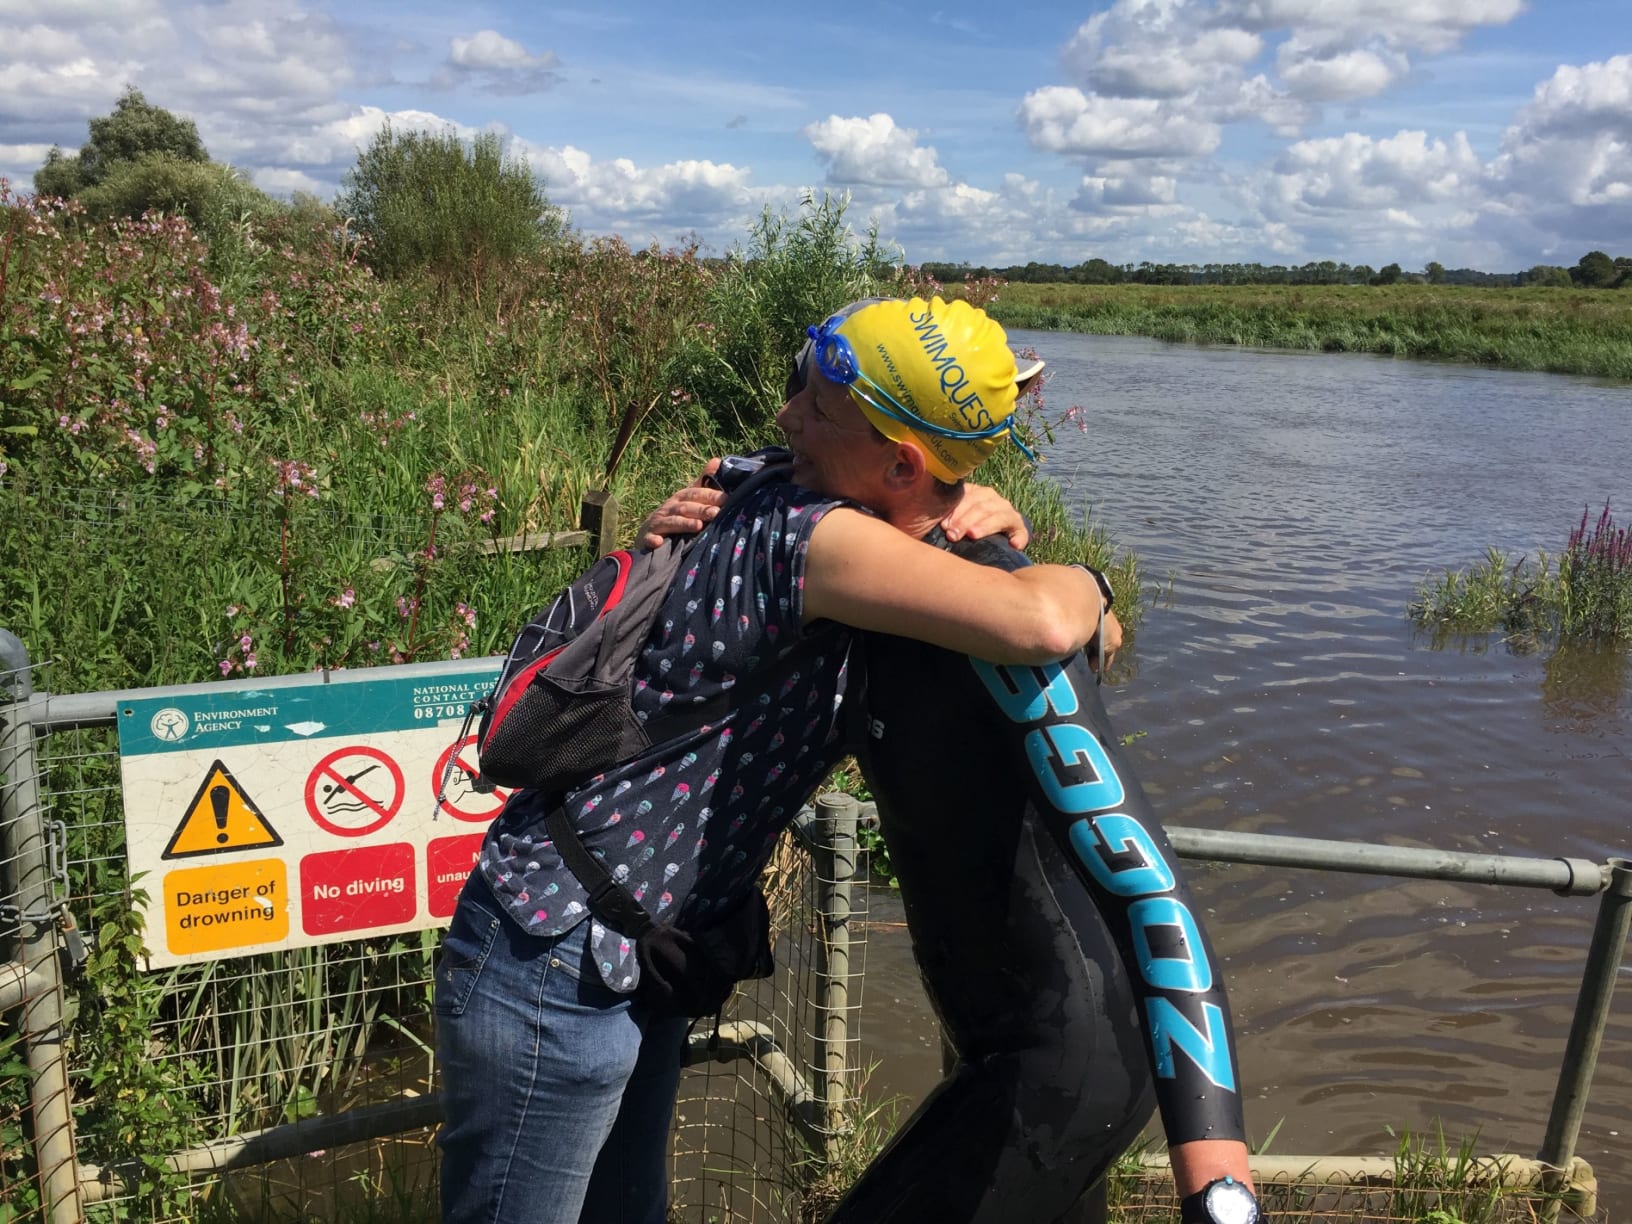 Swimmer embracing a friend after river swim